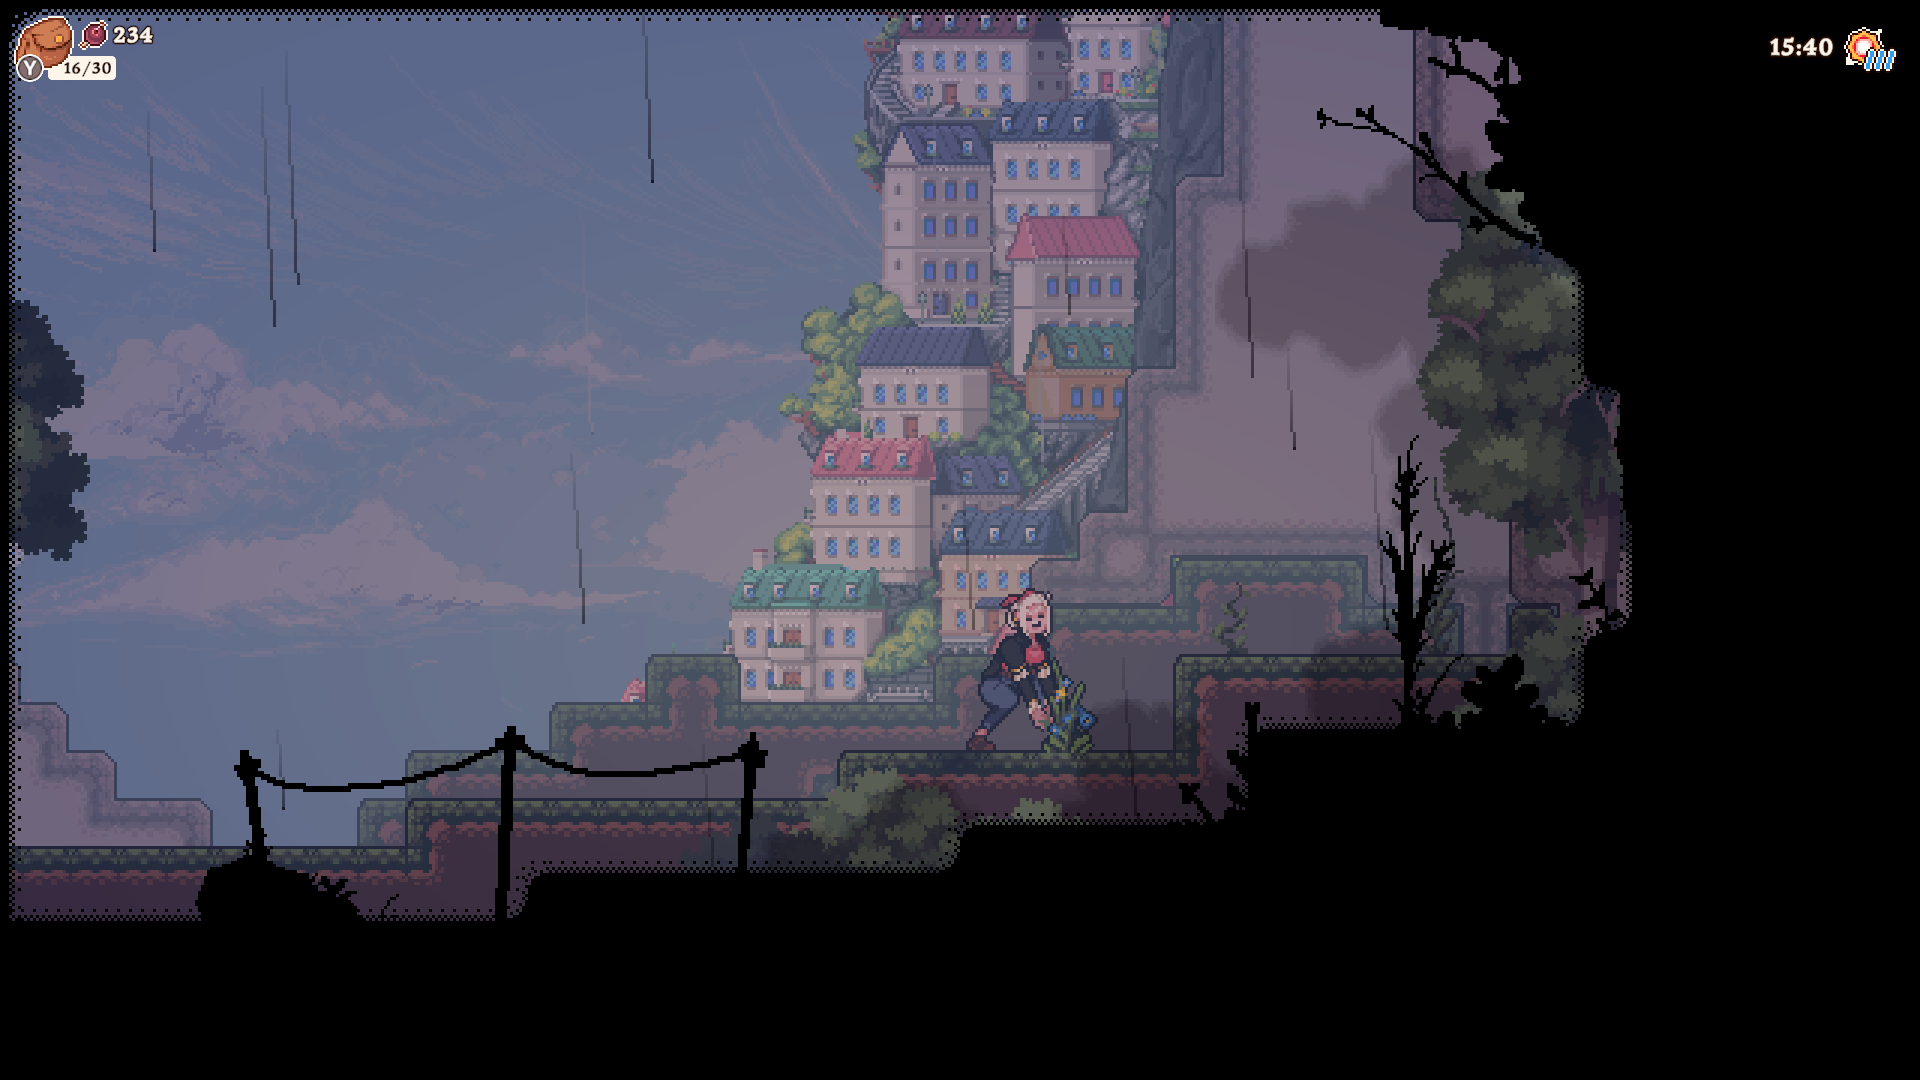 Gameplay Screenshot of Flora harvesting a plant in a nook somewhere in town.